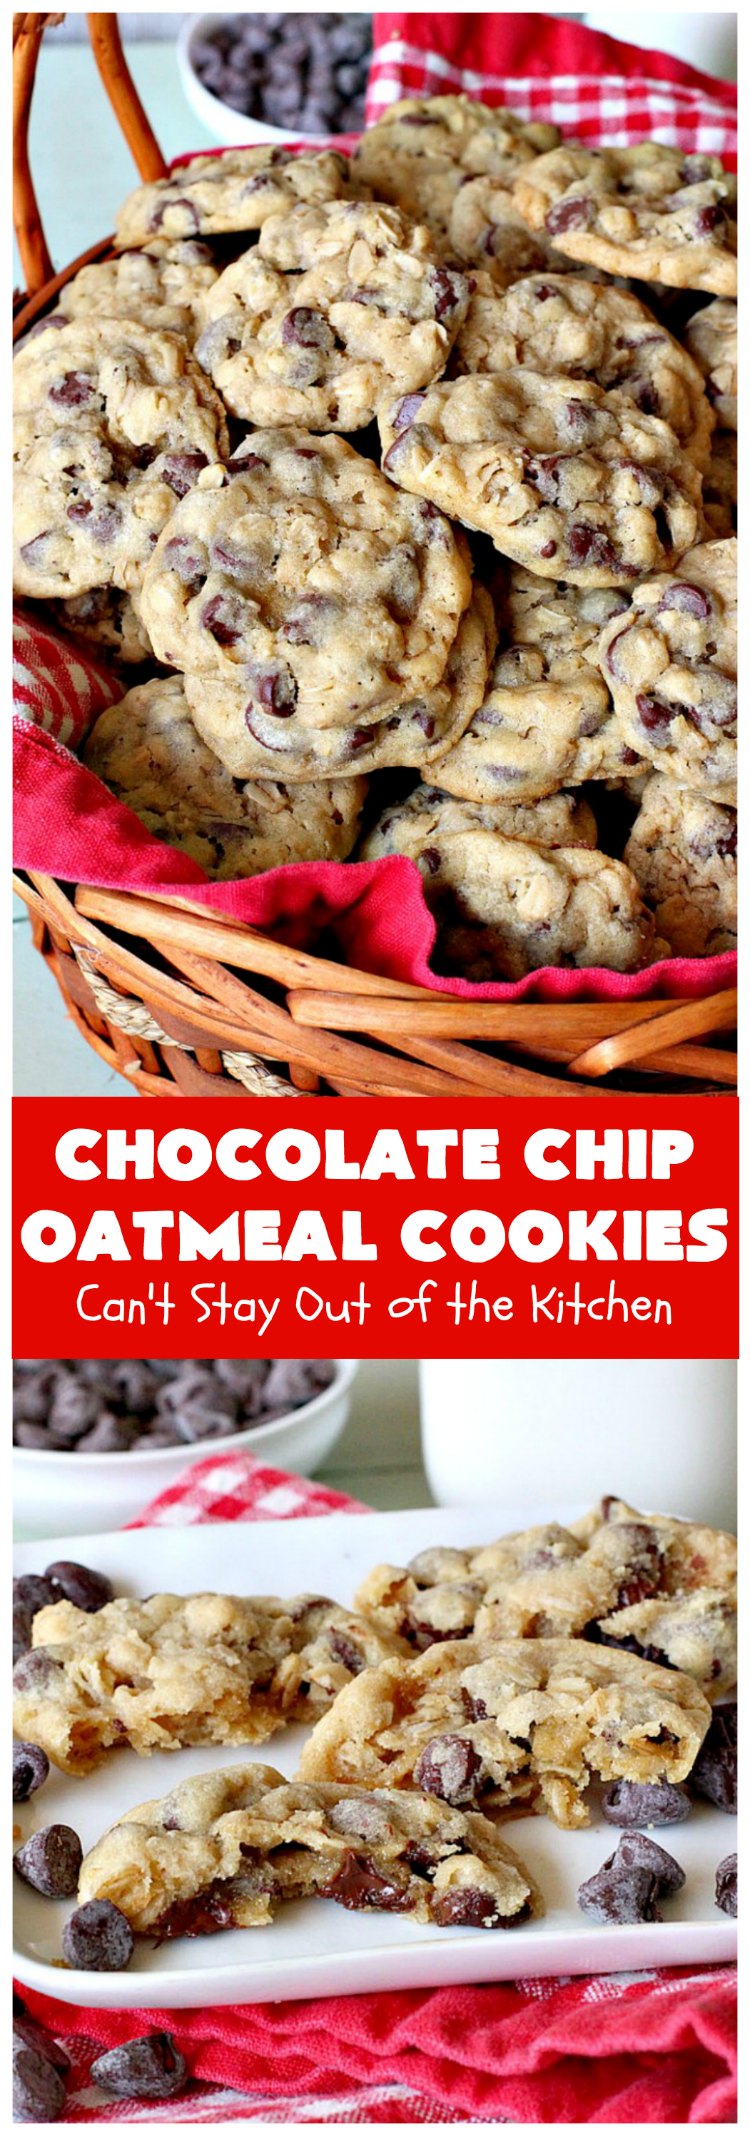 Chocolate Chip Oatmeal Cookies | Can't Stay Out of the Kitchen | these #cookies are the best of both worlds! The best #ChocolateChipCookies with the best #OatmealCookies. Mouthwatering & irresistible. #tailgating #dessert #ChocolateDessert #ChristmasCookieExchange #chocolate #ChocolateChips #oatmeal #Holiday #HolidayDessert #ChocolateChipOatmealCookies